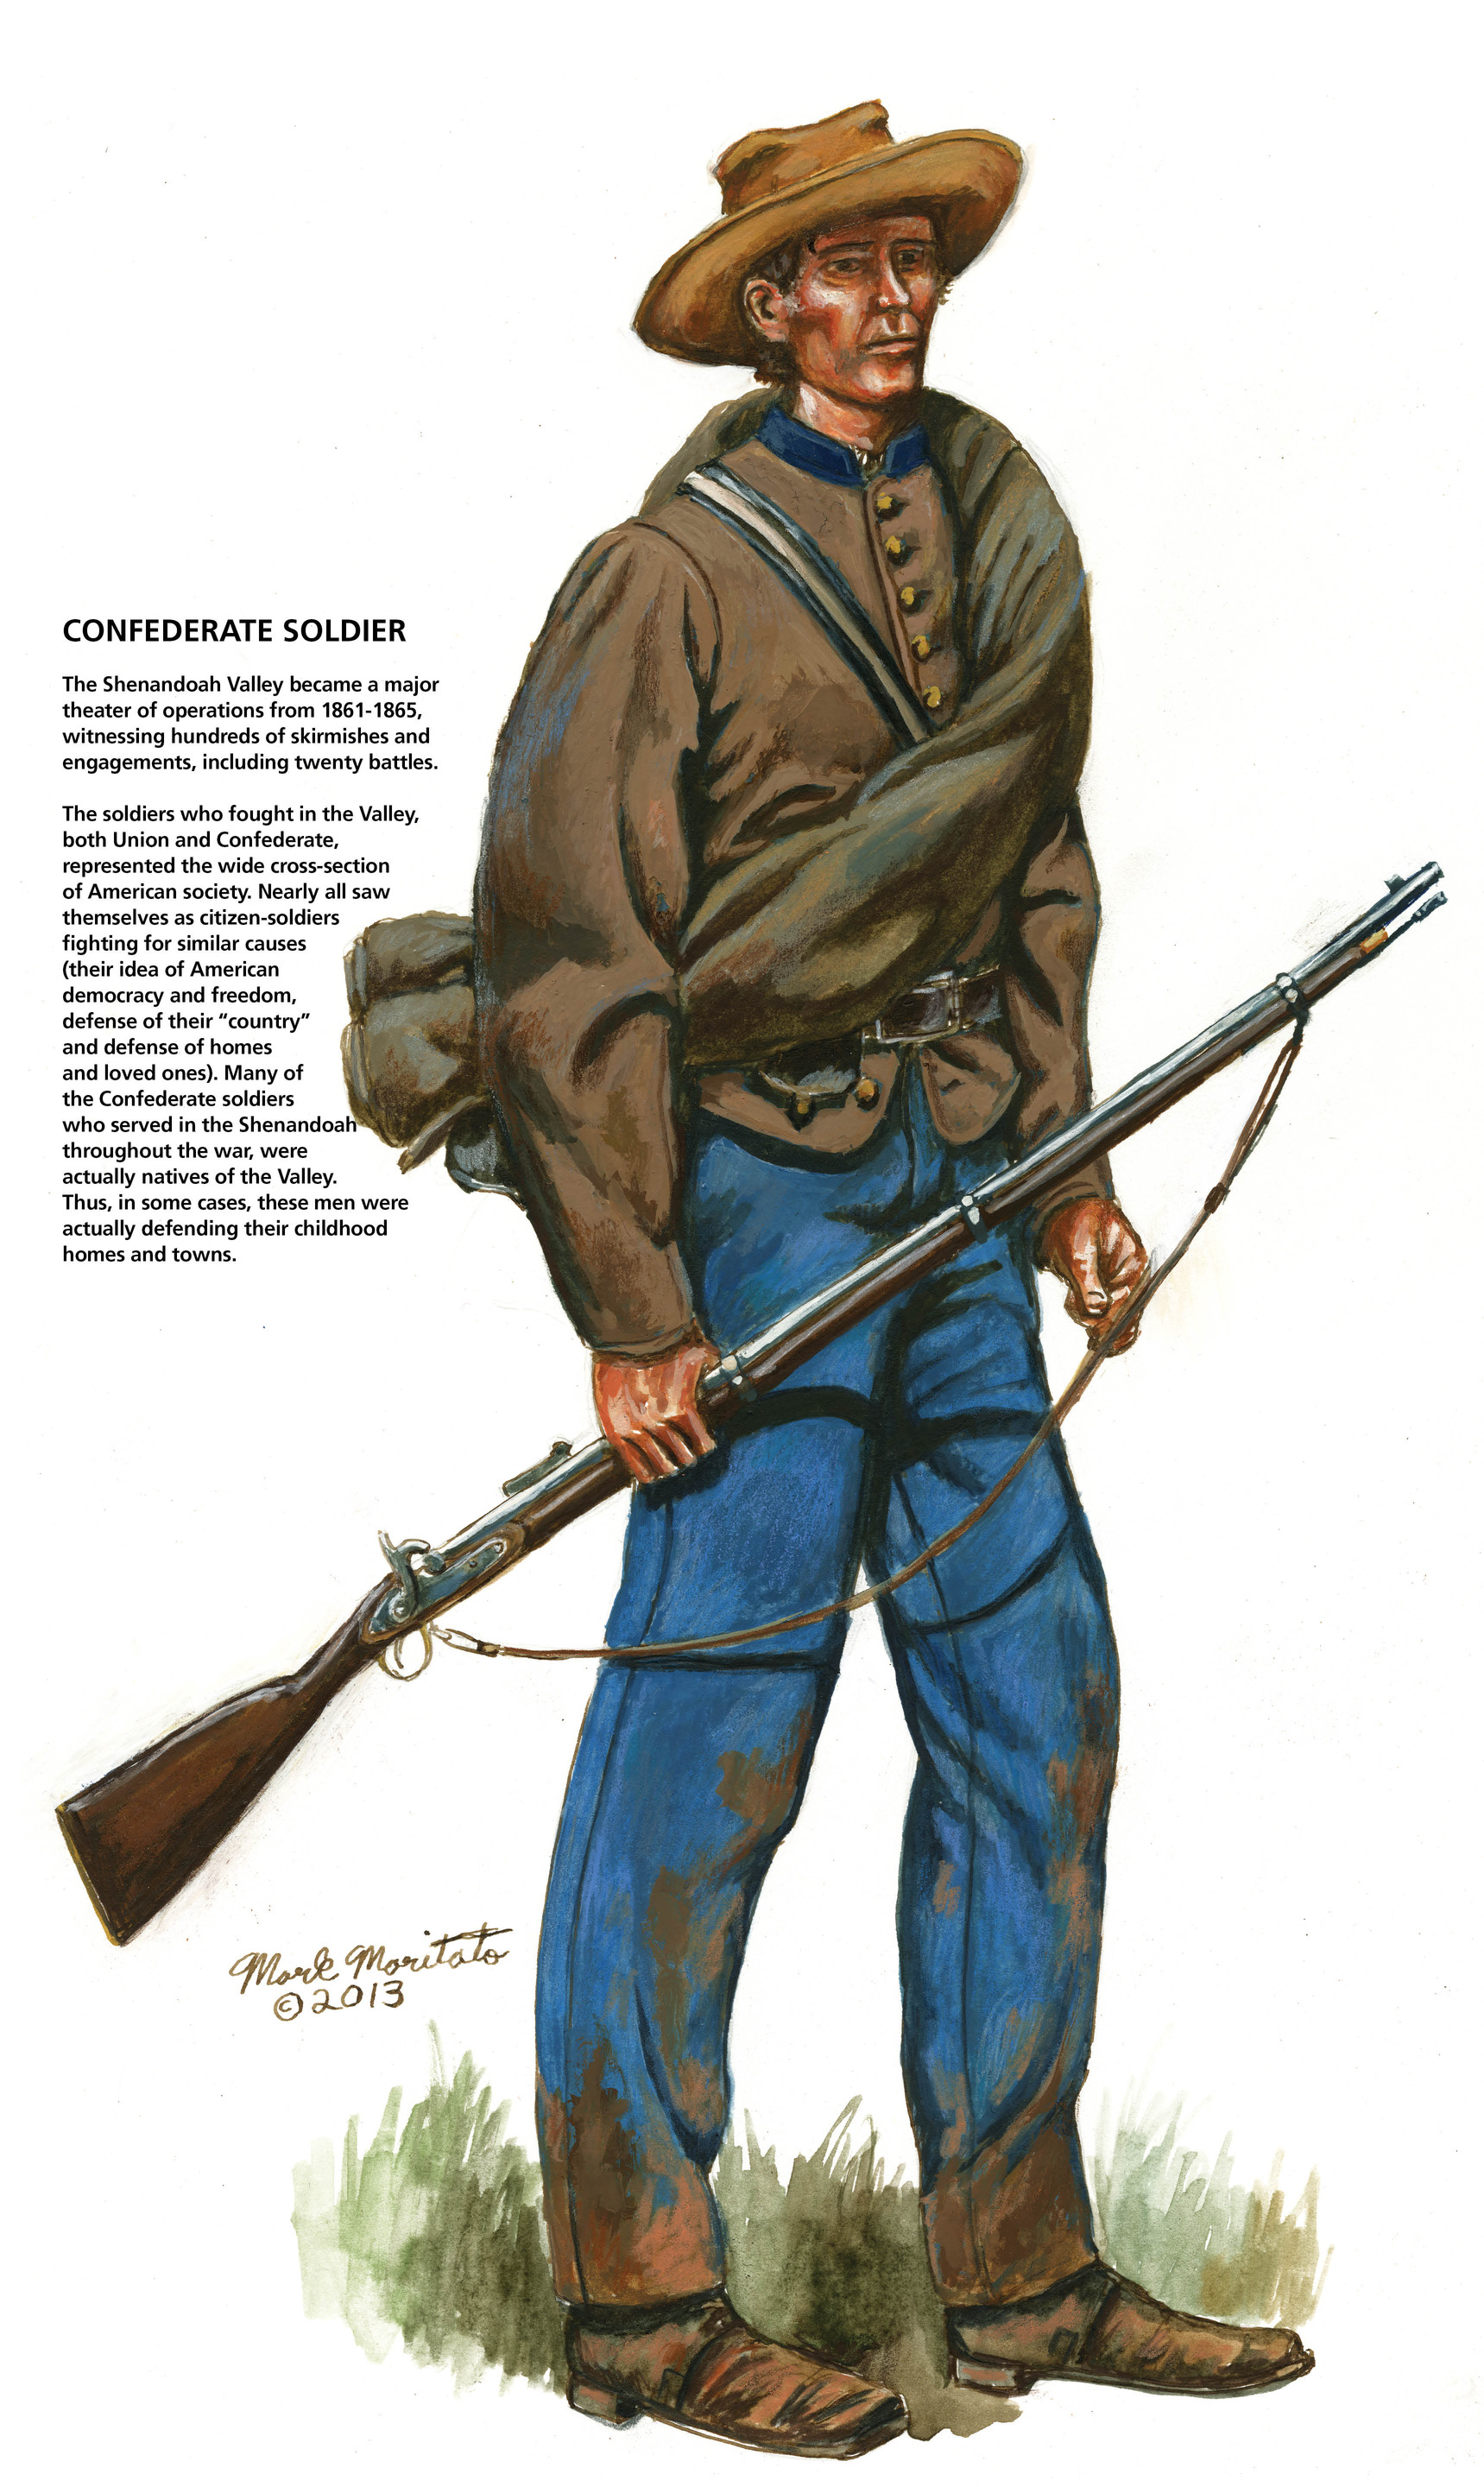 An exhibit panel shows an illustration and text describing a Confederate soldier with his uniform, firearm, and equipment. 